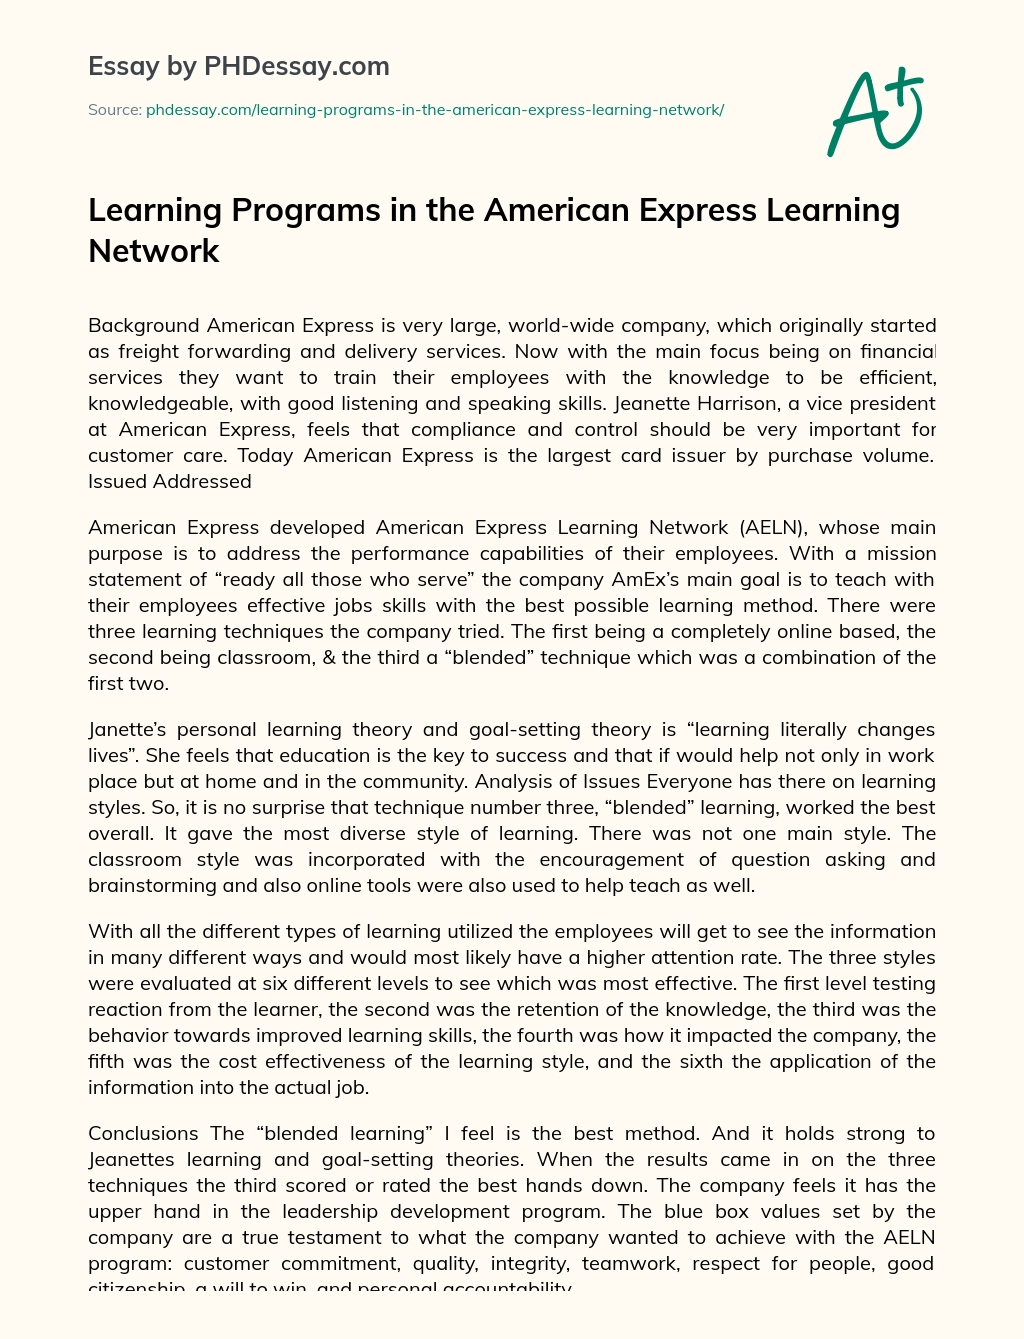 Learning Programs in the American Express Learning Network essay